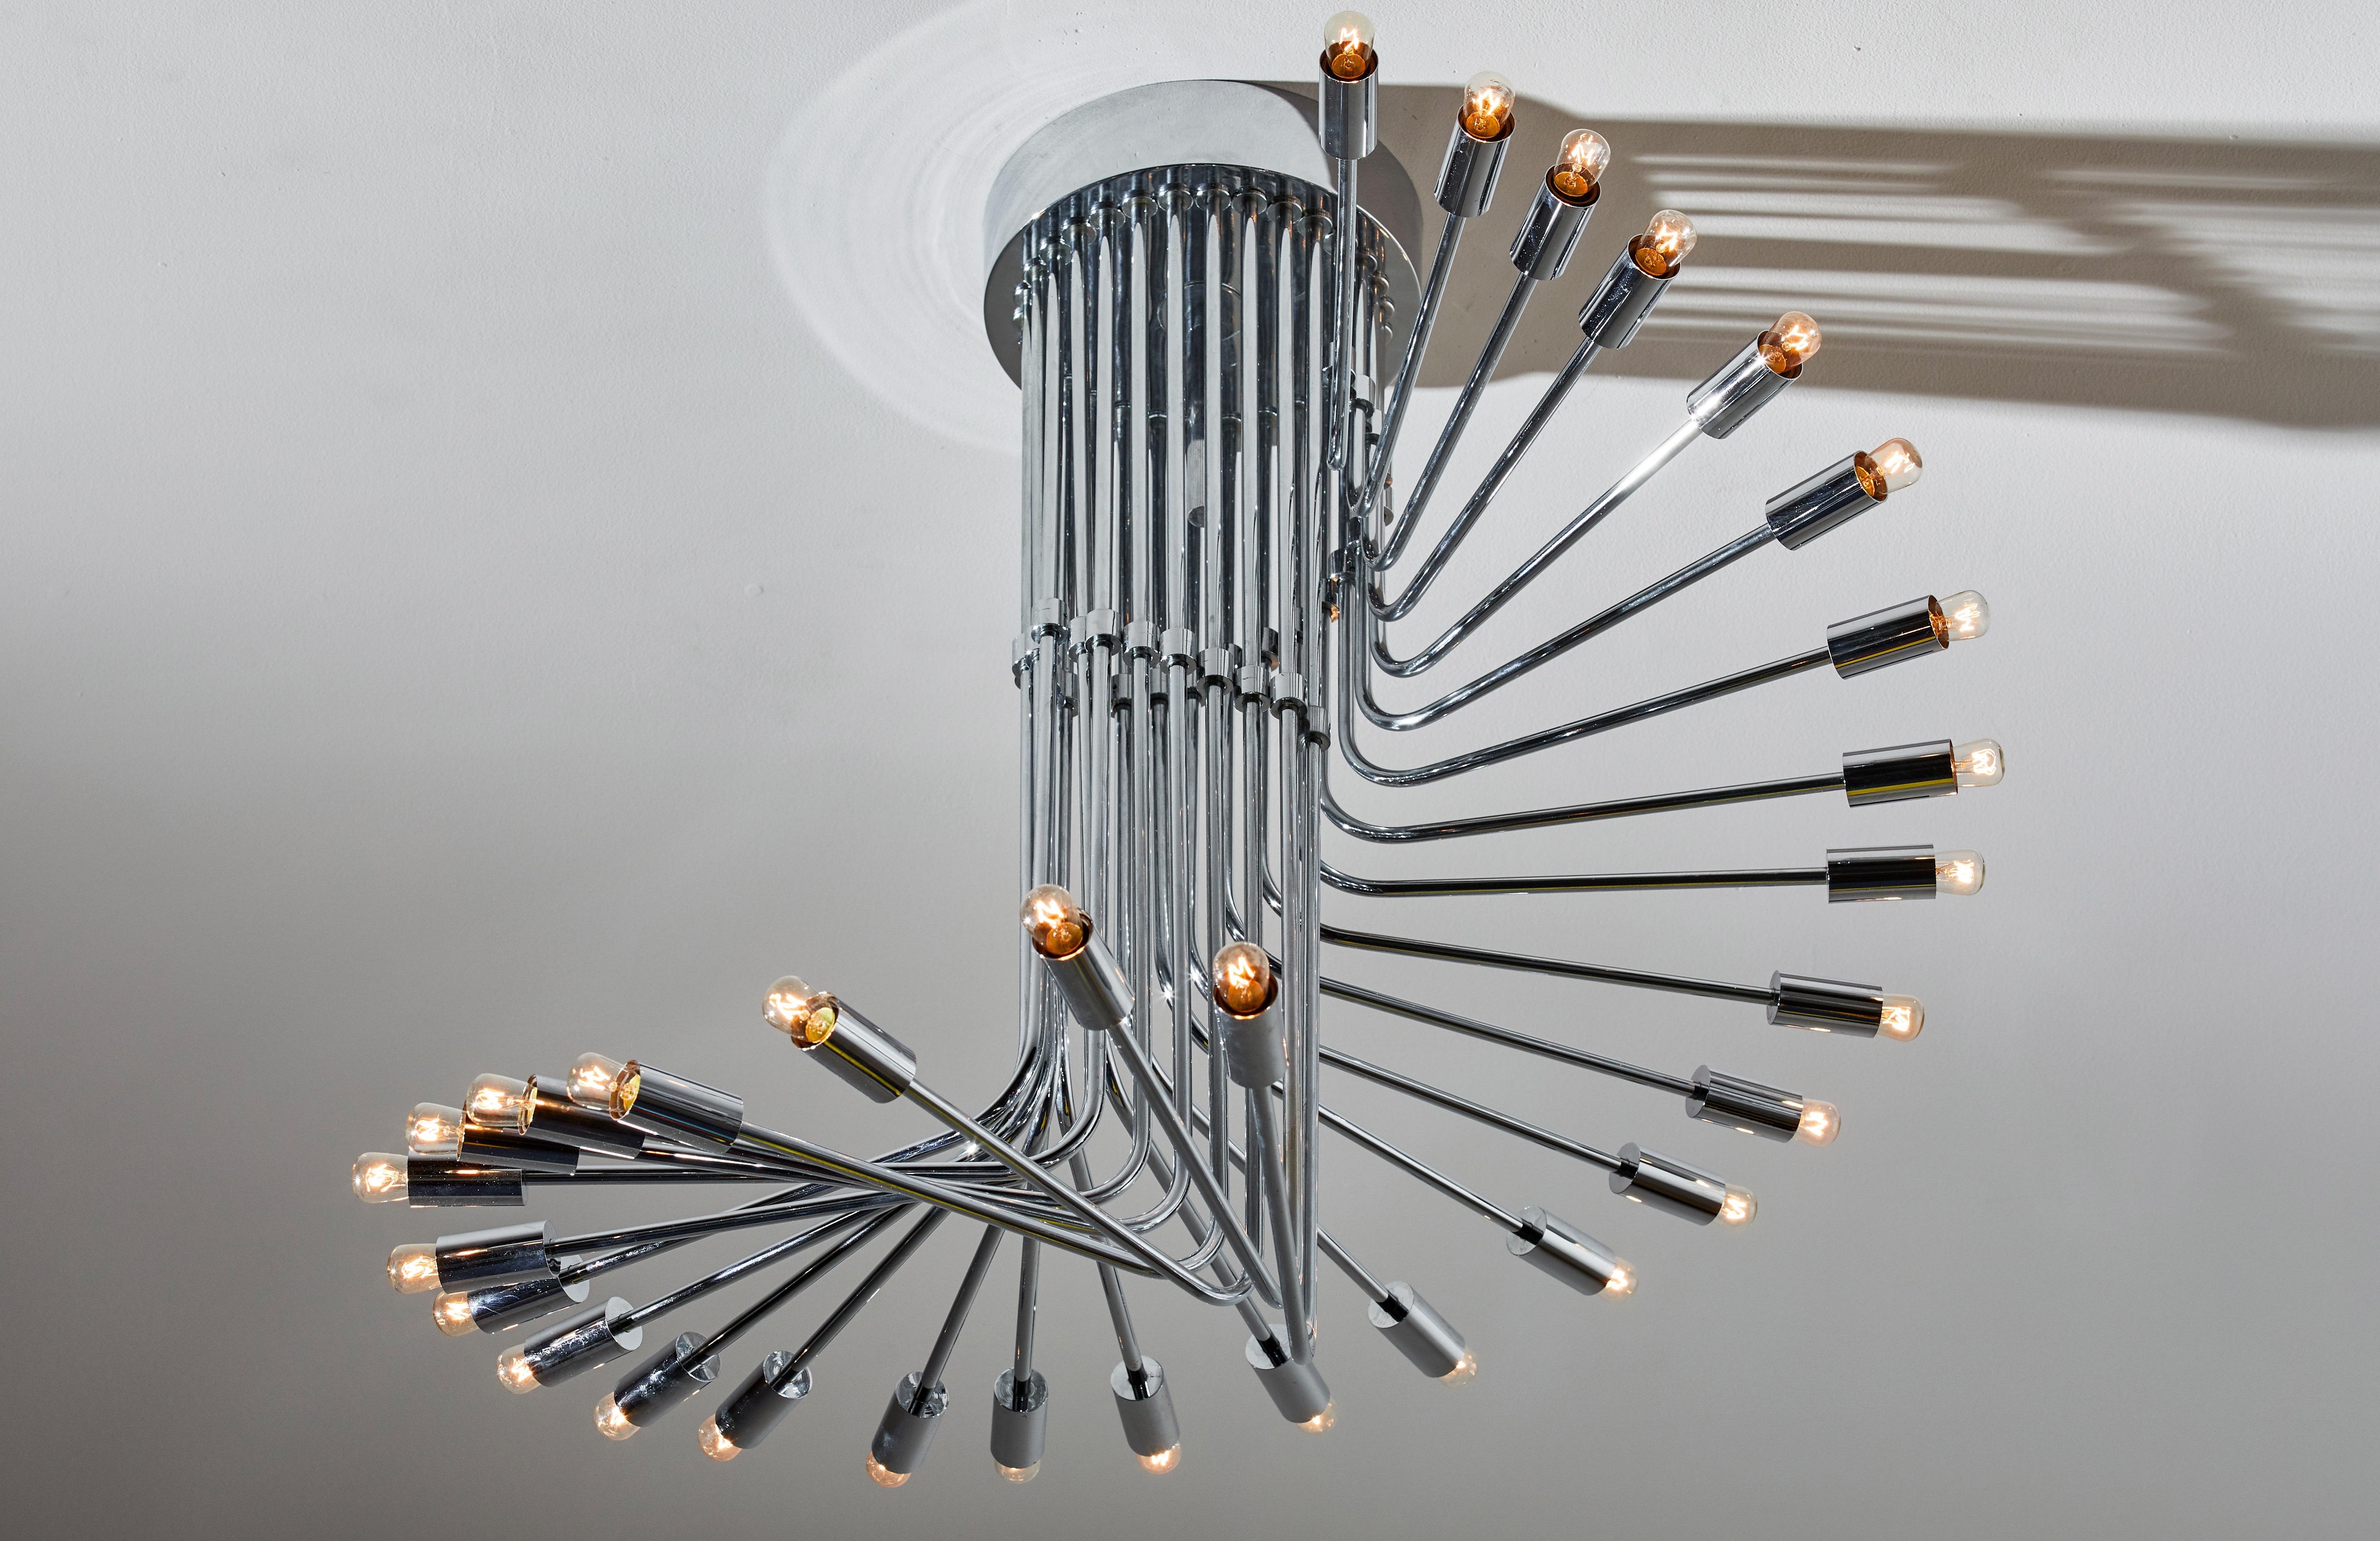 Suspension light by Reggiani. Manufactured in Italy, circa 1970s. Chrome-plated brass. Rewired for U.S. junction boxes. Takes 30 E27 25W maximum bulbs. Bulbs provided as a one time courtesy.